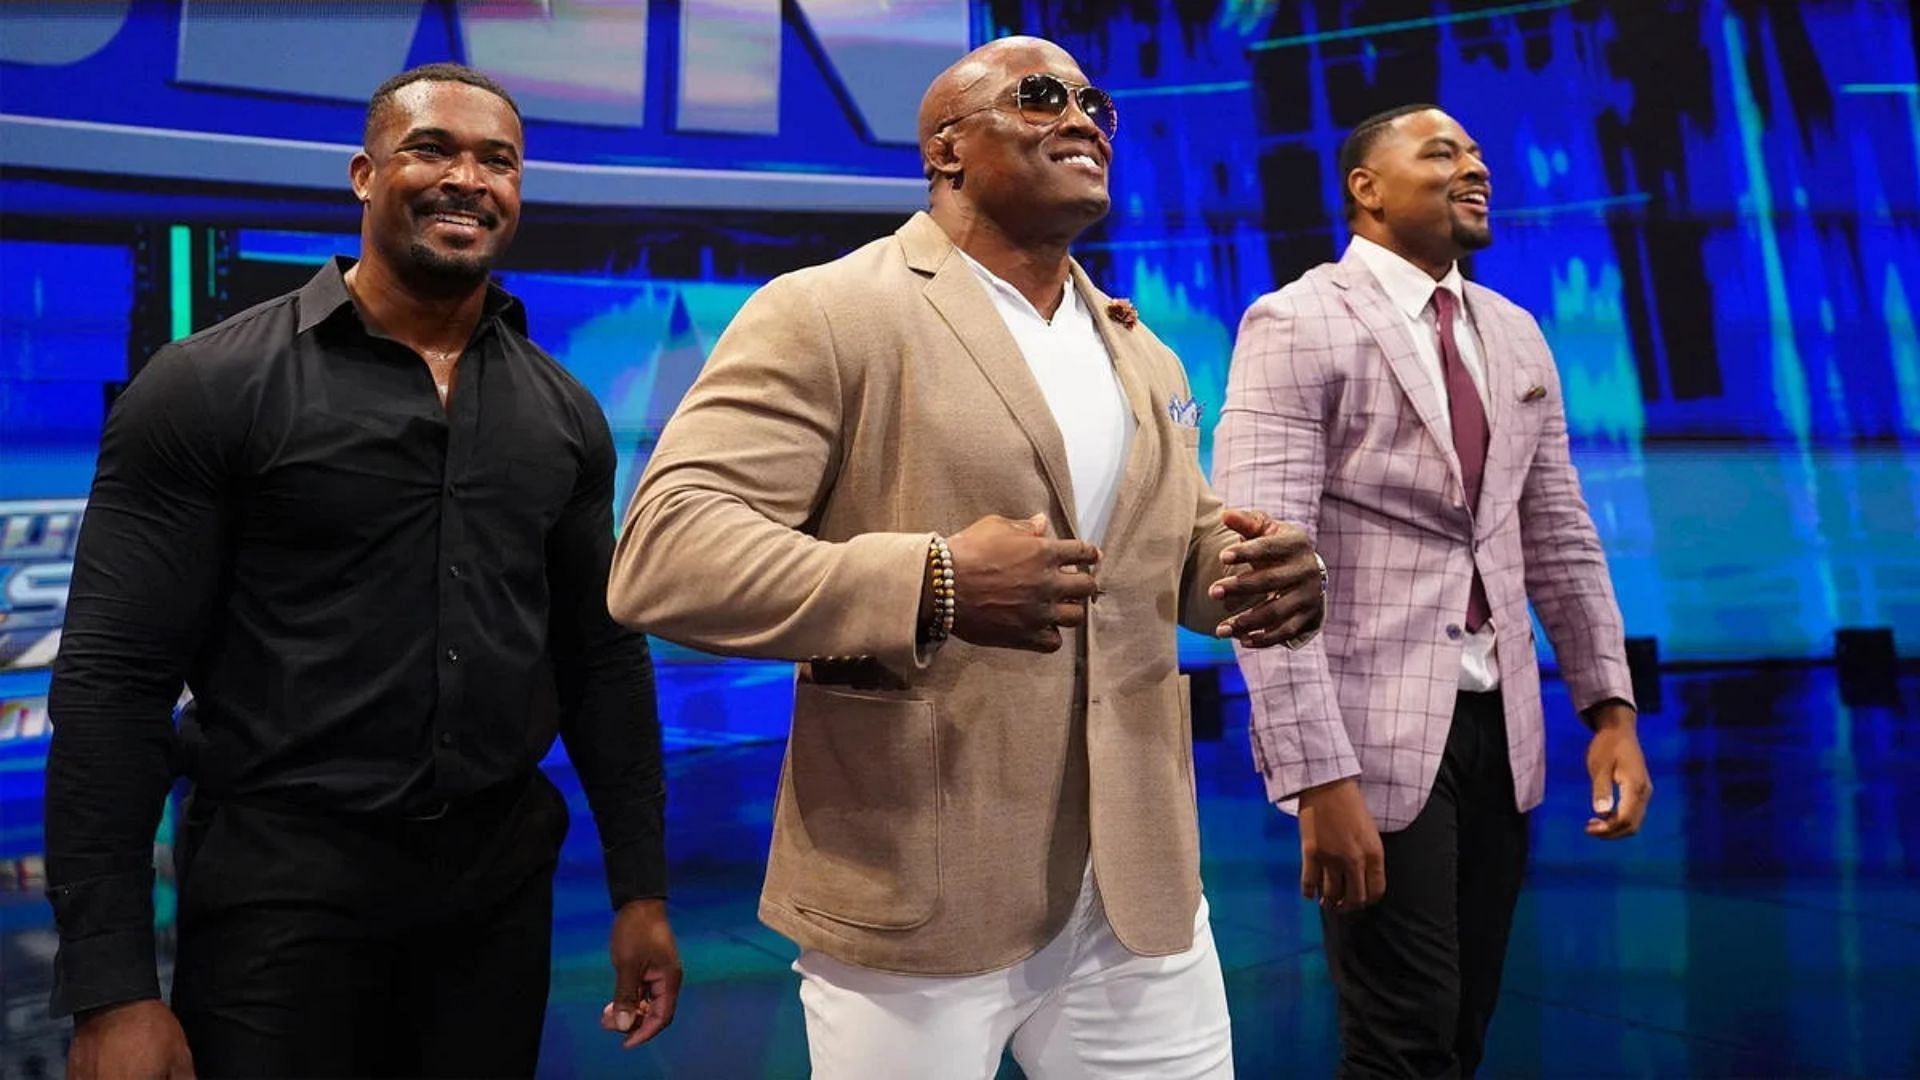 From left to right: Montez Ford, Bobby Lashley and Angelo Dawkins